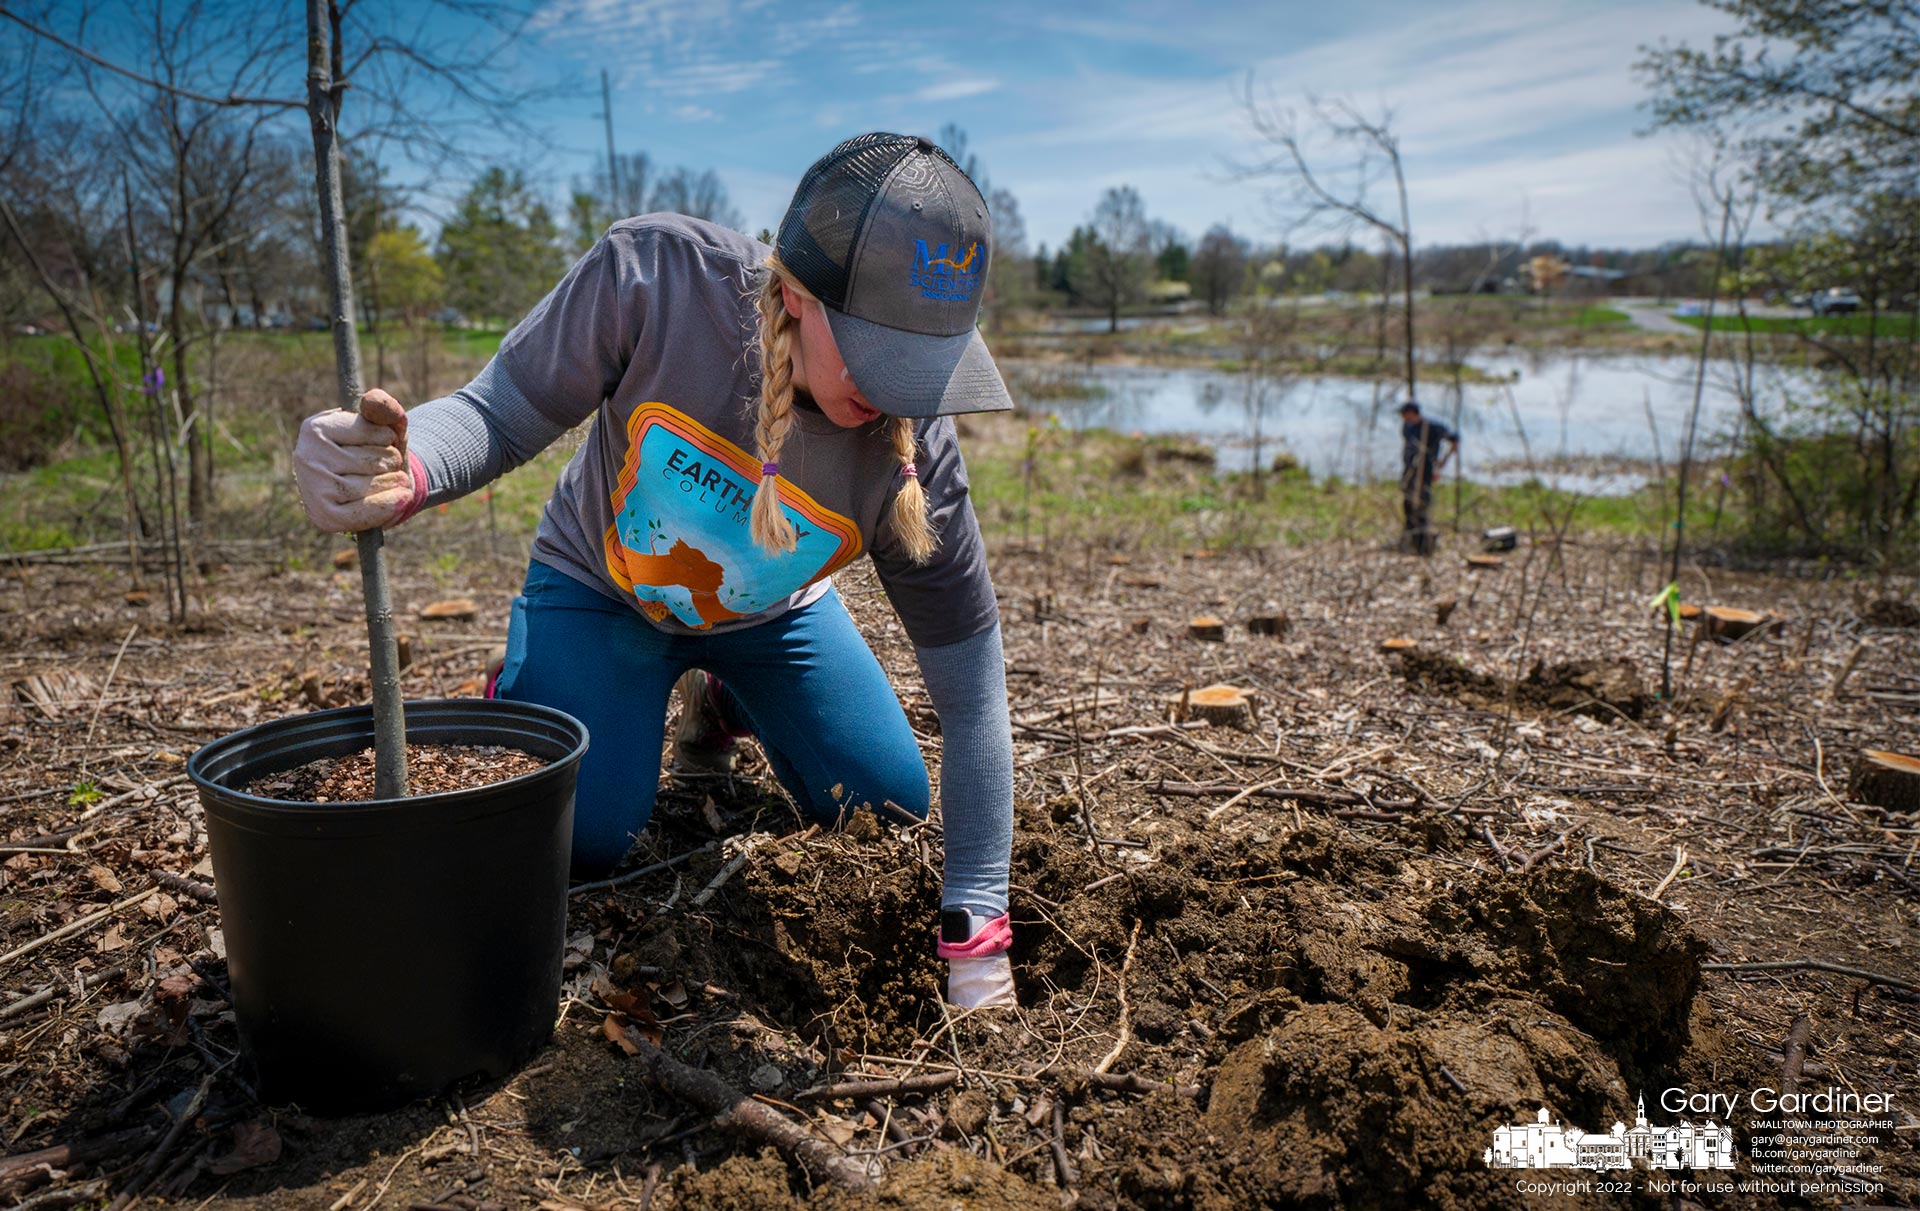 MAD Scientist's Jenny Adkins plants a white oak tree on the small hill at the north end of the Highlands wetlands where an earlier crew removed the overgrowth from invasive species such as Bradford pears and honeysuckle. My Final Photo for April 20, 2022.